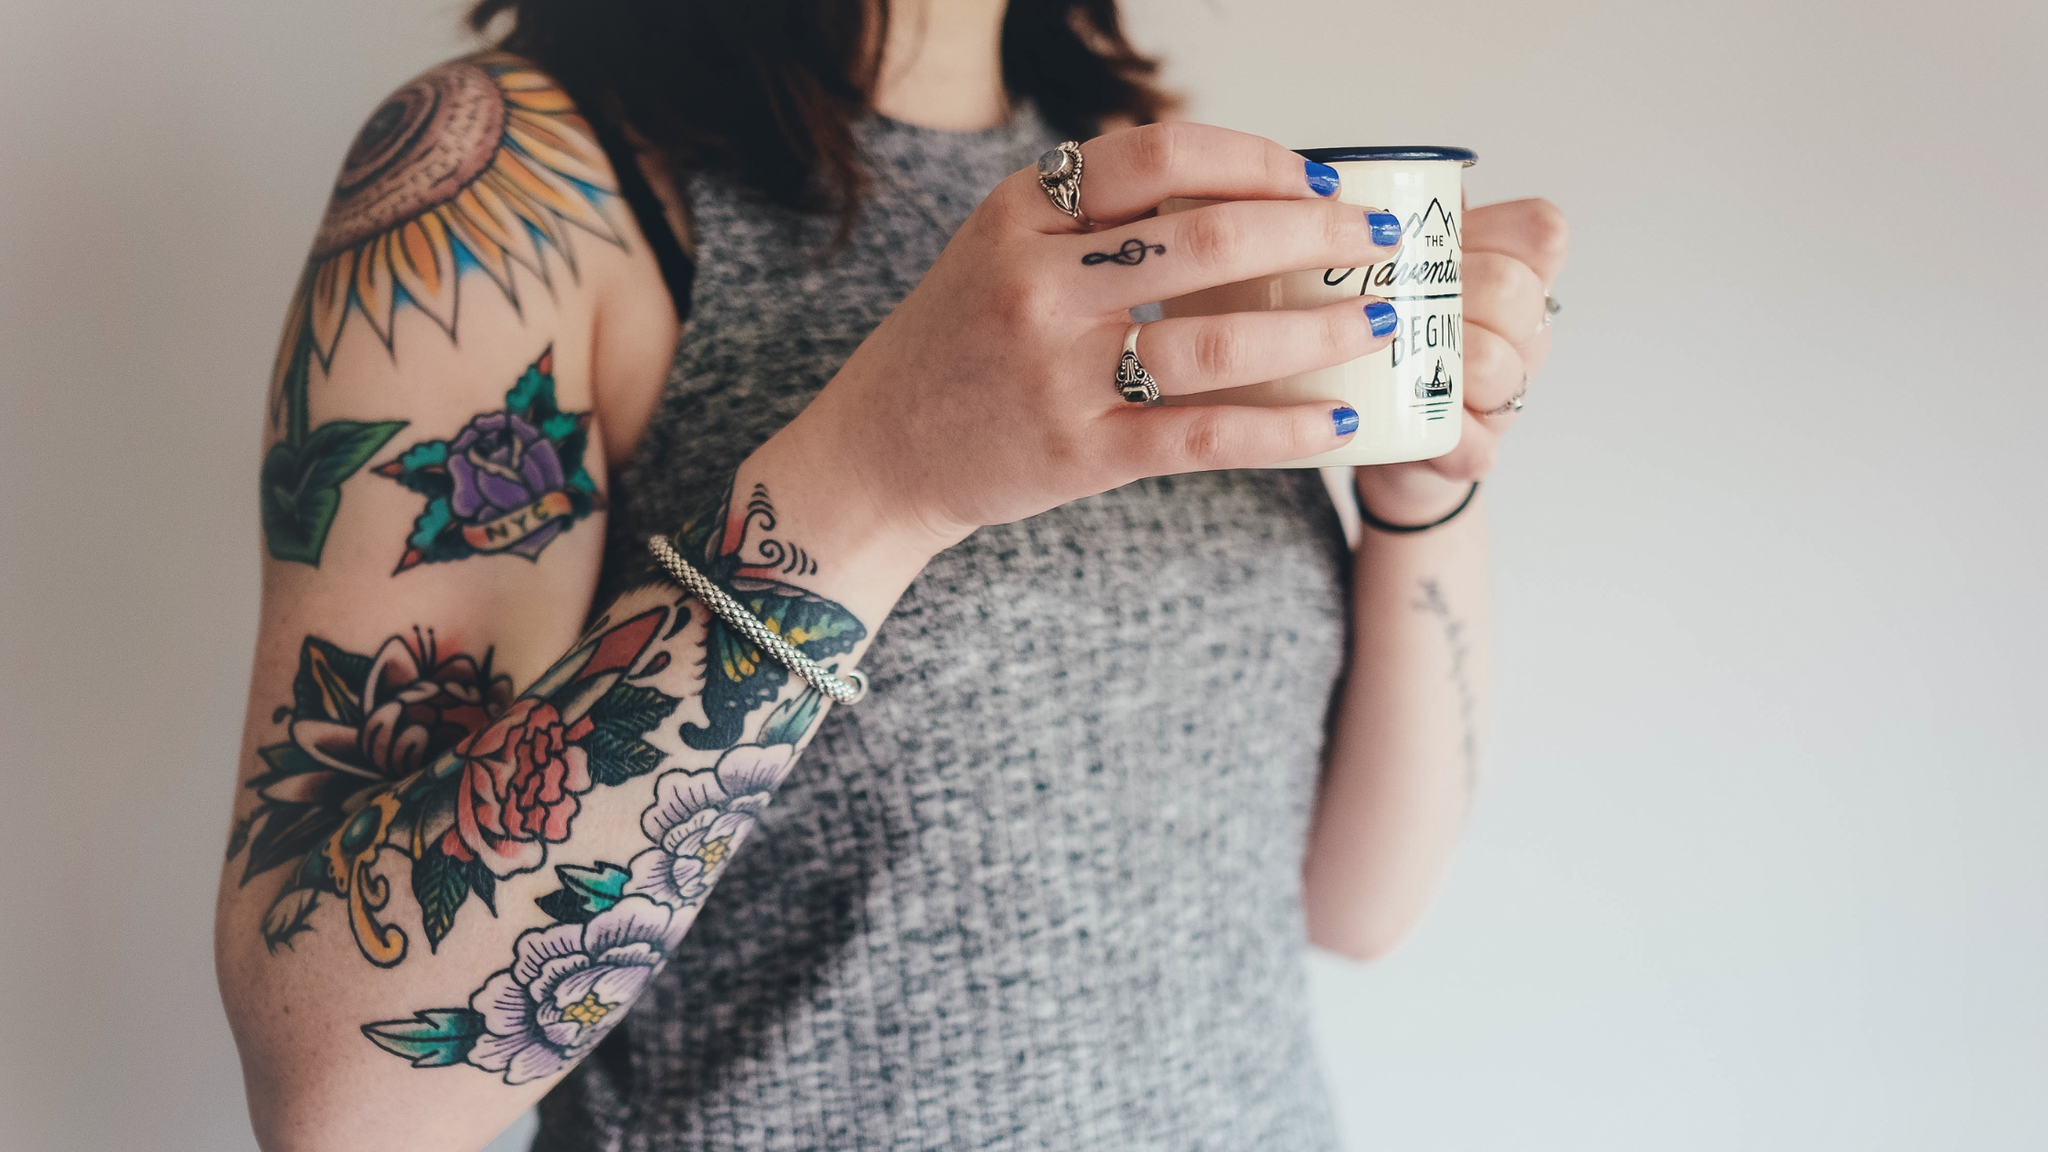 Spray Tanning and Tattoos: What You Need to Know